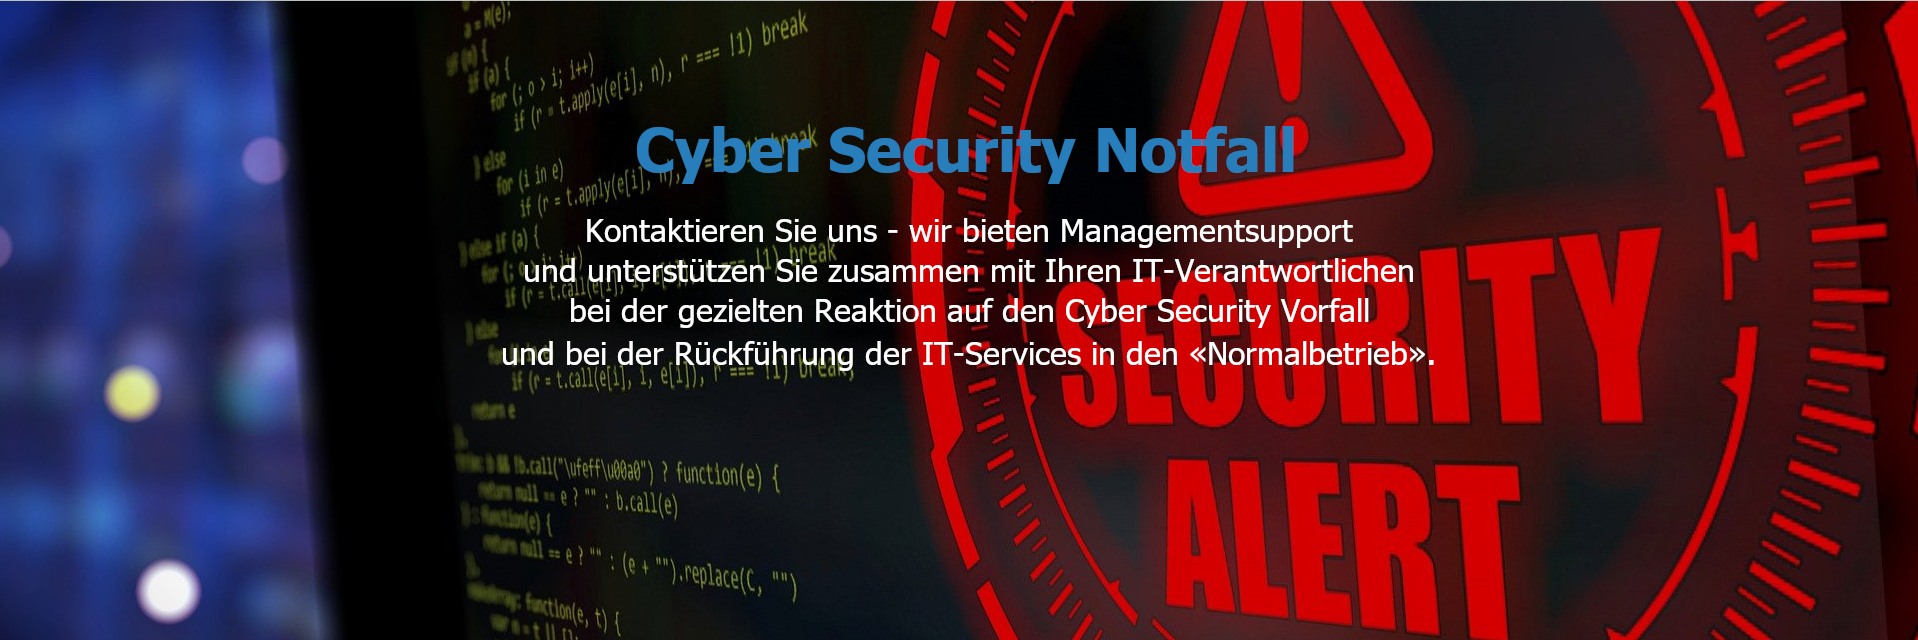 Cyber Security Notfall